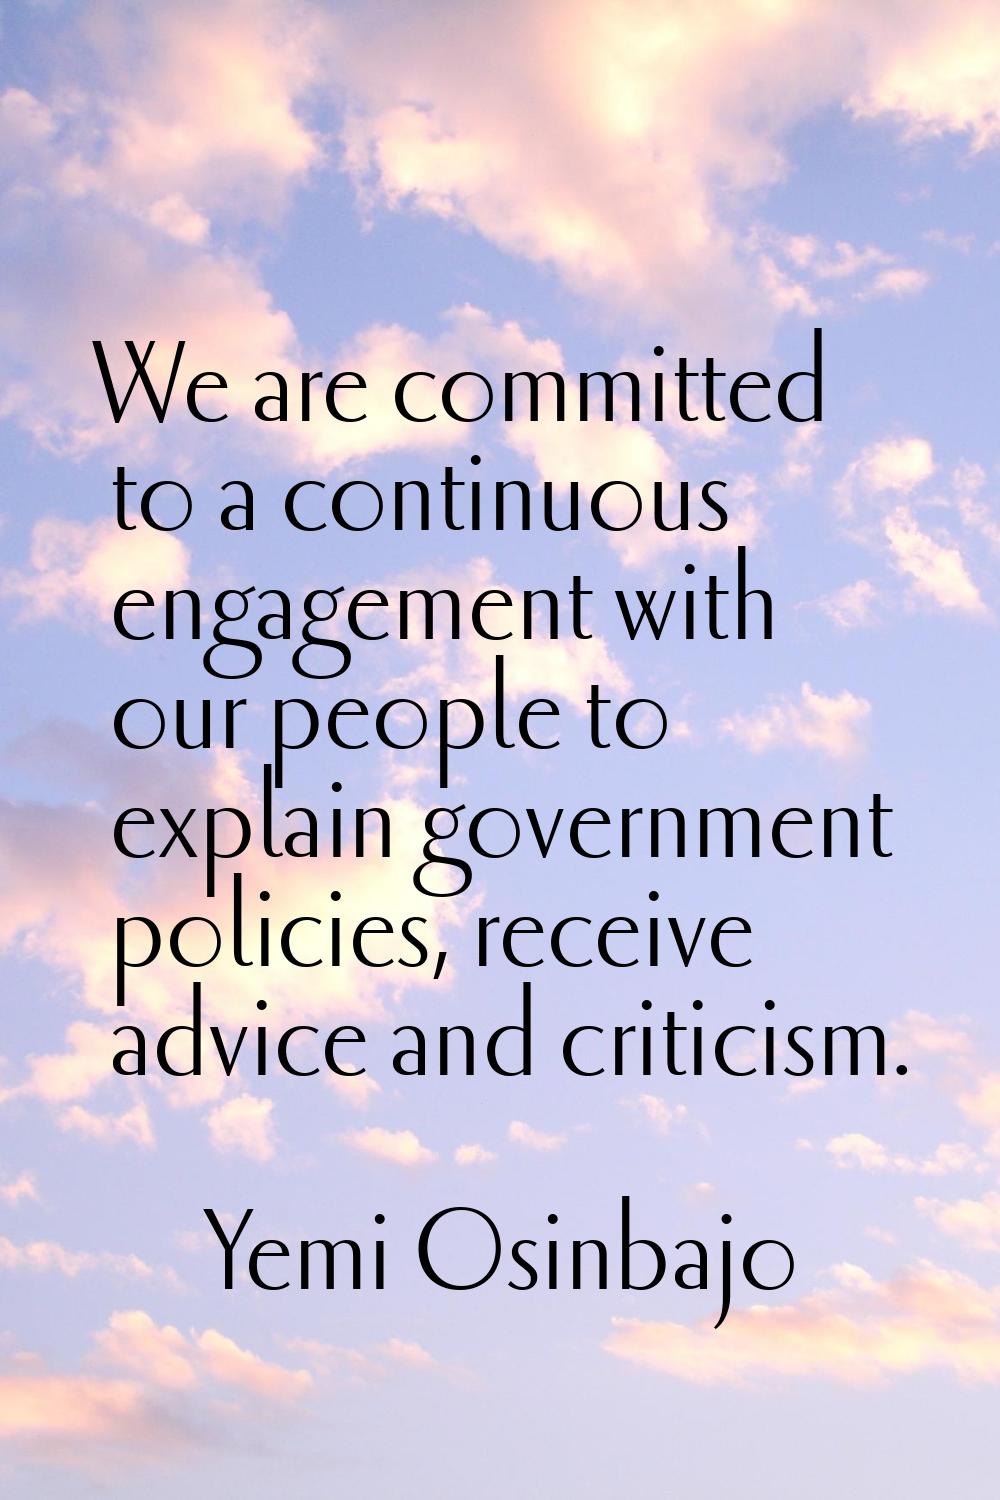 We are committed to a continuous engagement with our people to explain government policies, receive